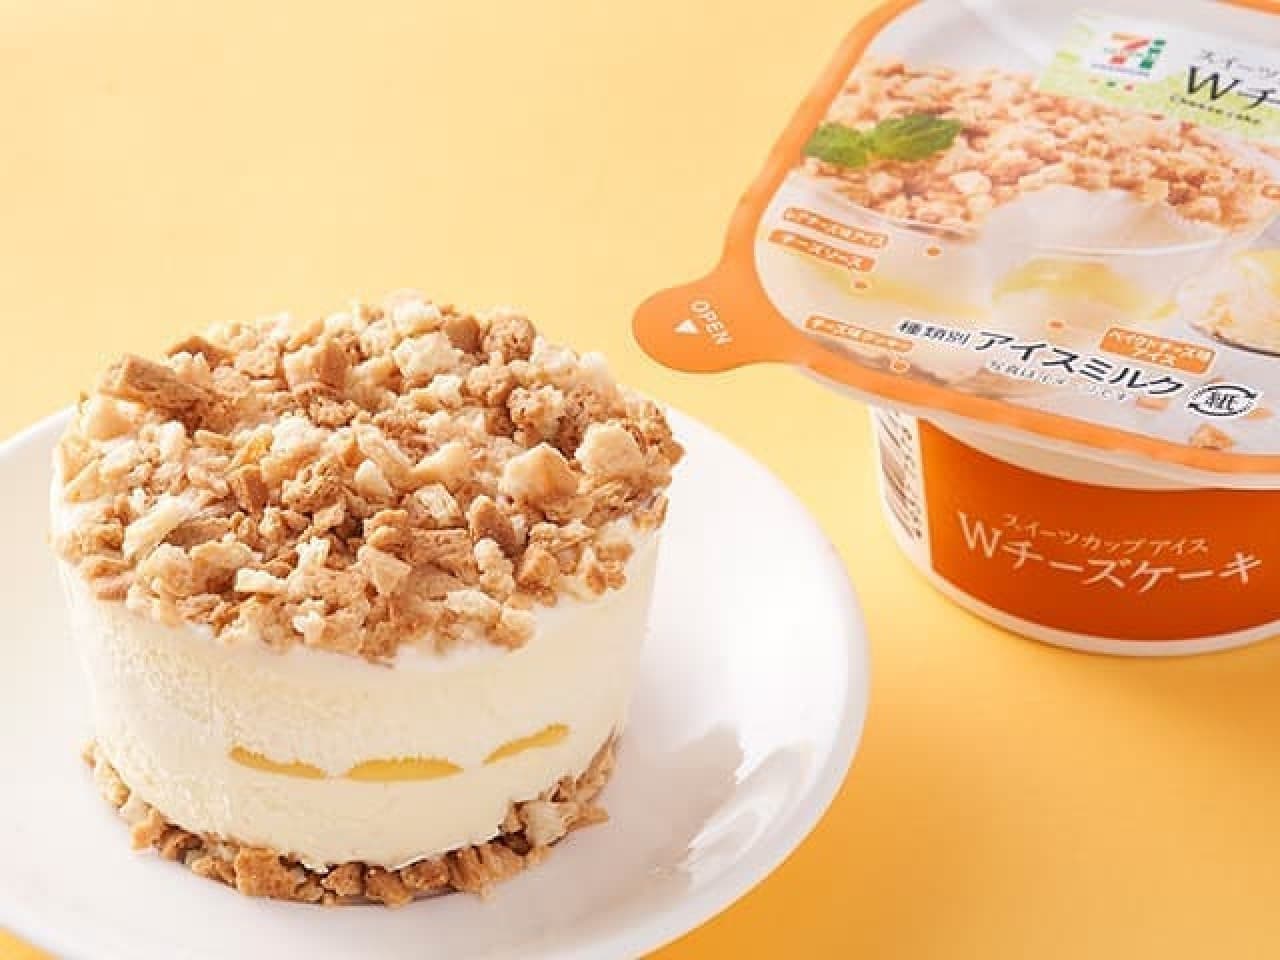 7-ELEVEN Premium Sweets Cup Ice W Cheesecake